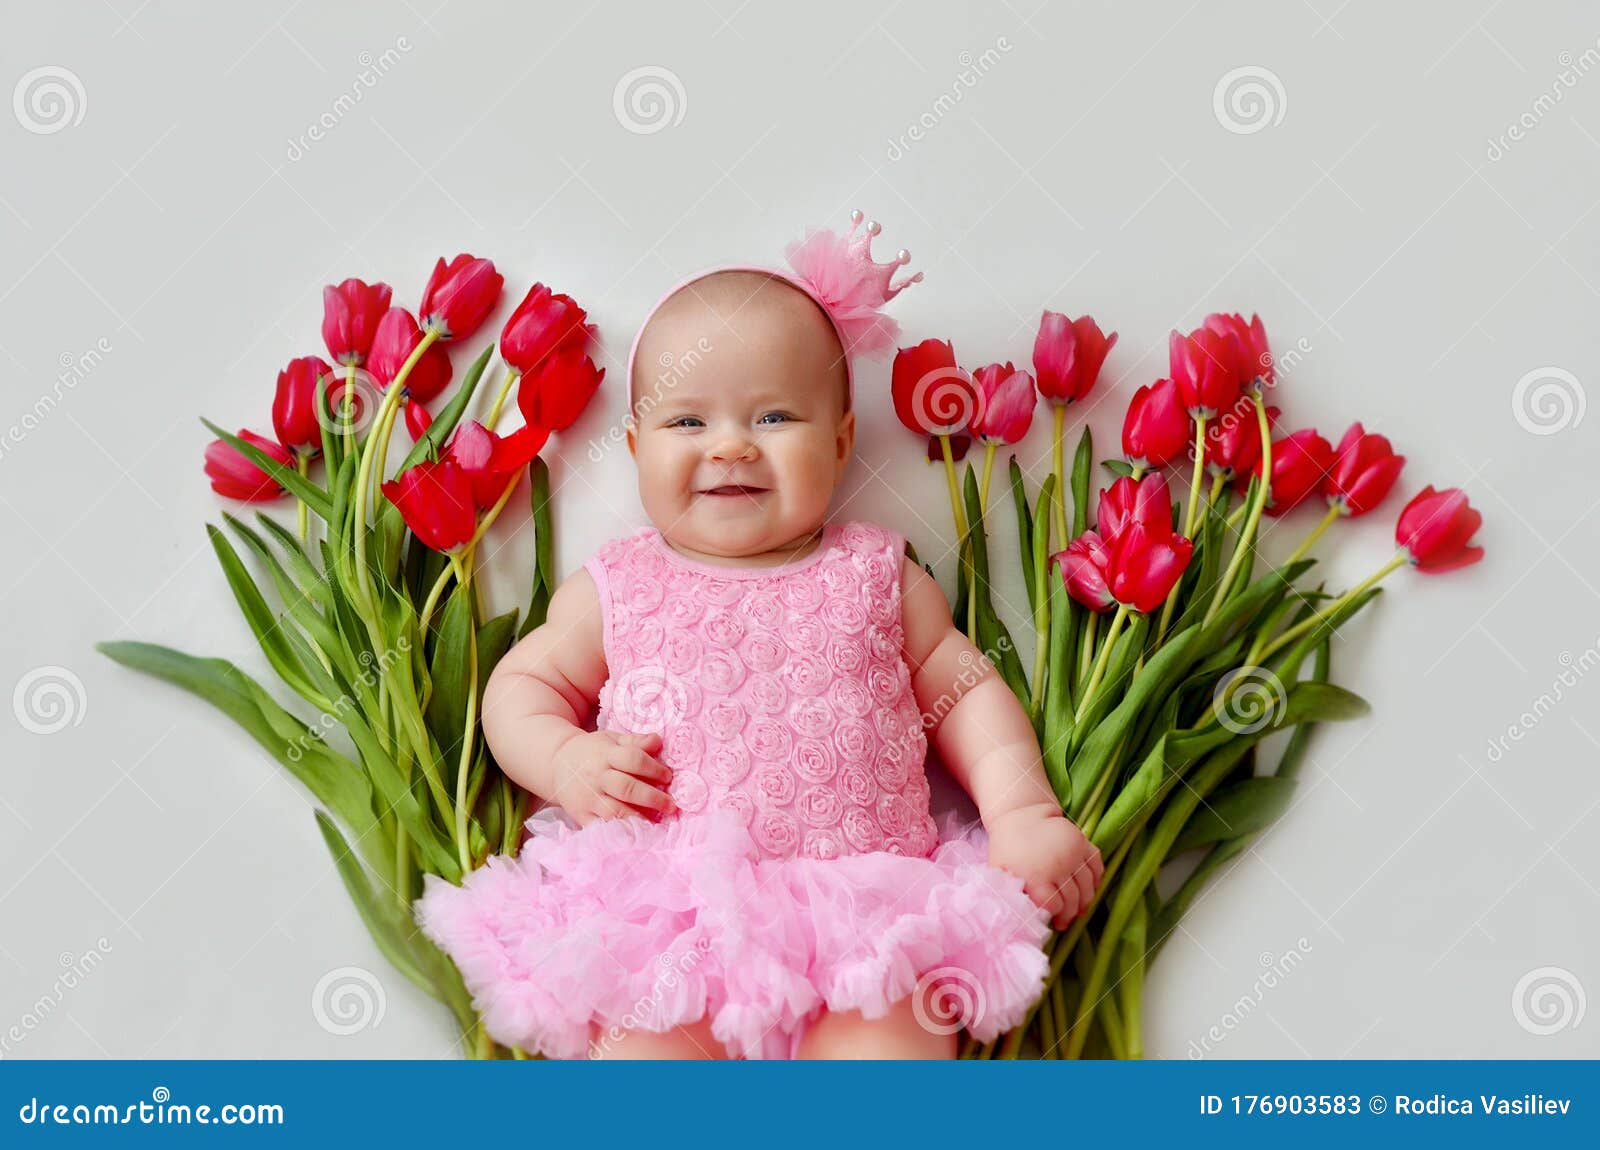 Cute Baby Girl with Flower Tulip Stock Image - Image of nursery ...